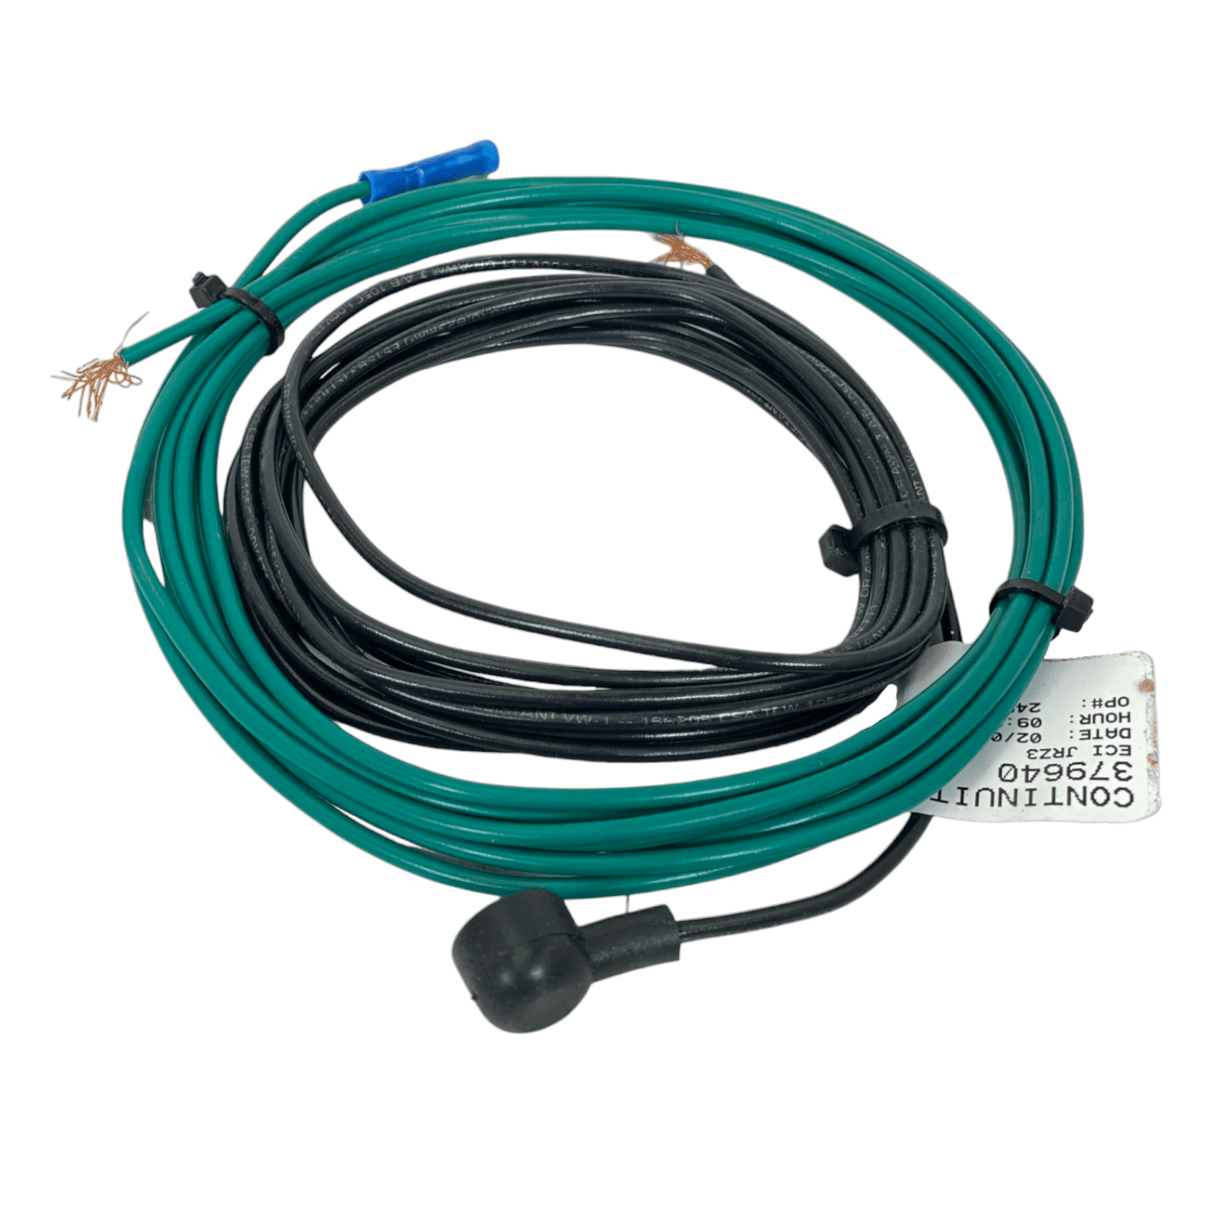 328388-93X Chelsea® Pto Power Take Off Air Electric Installation Kit.